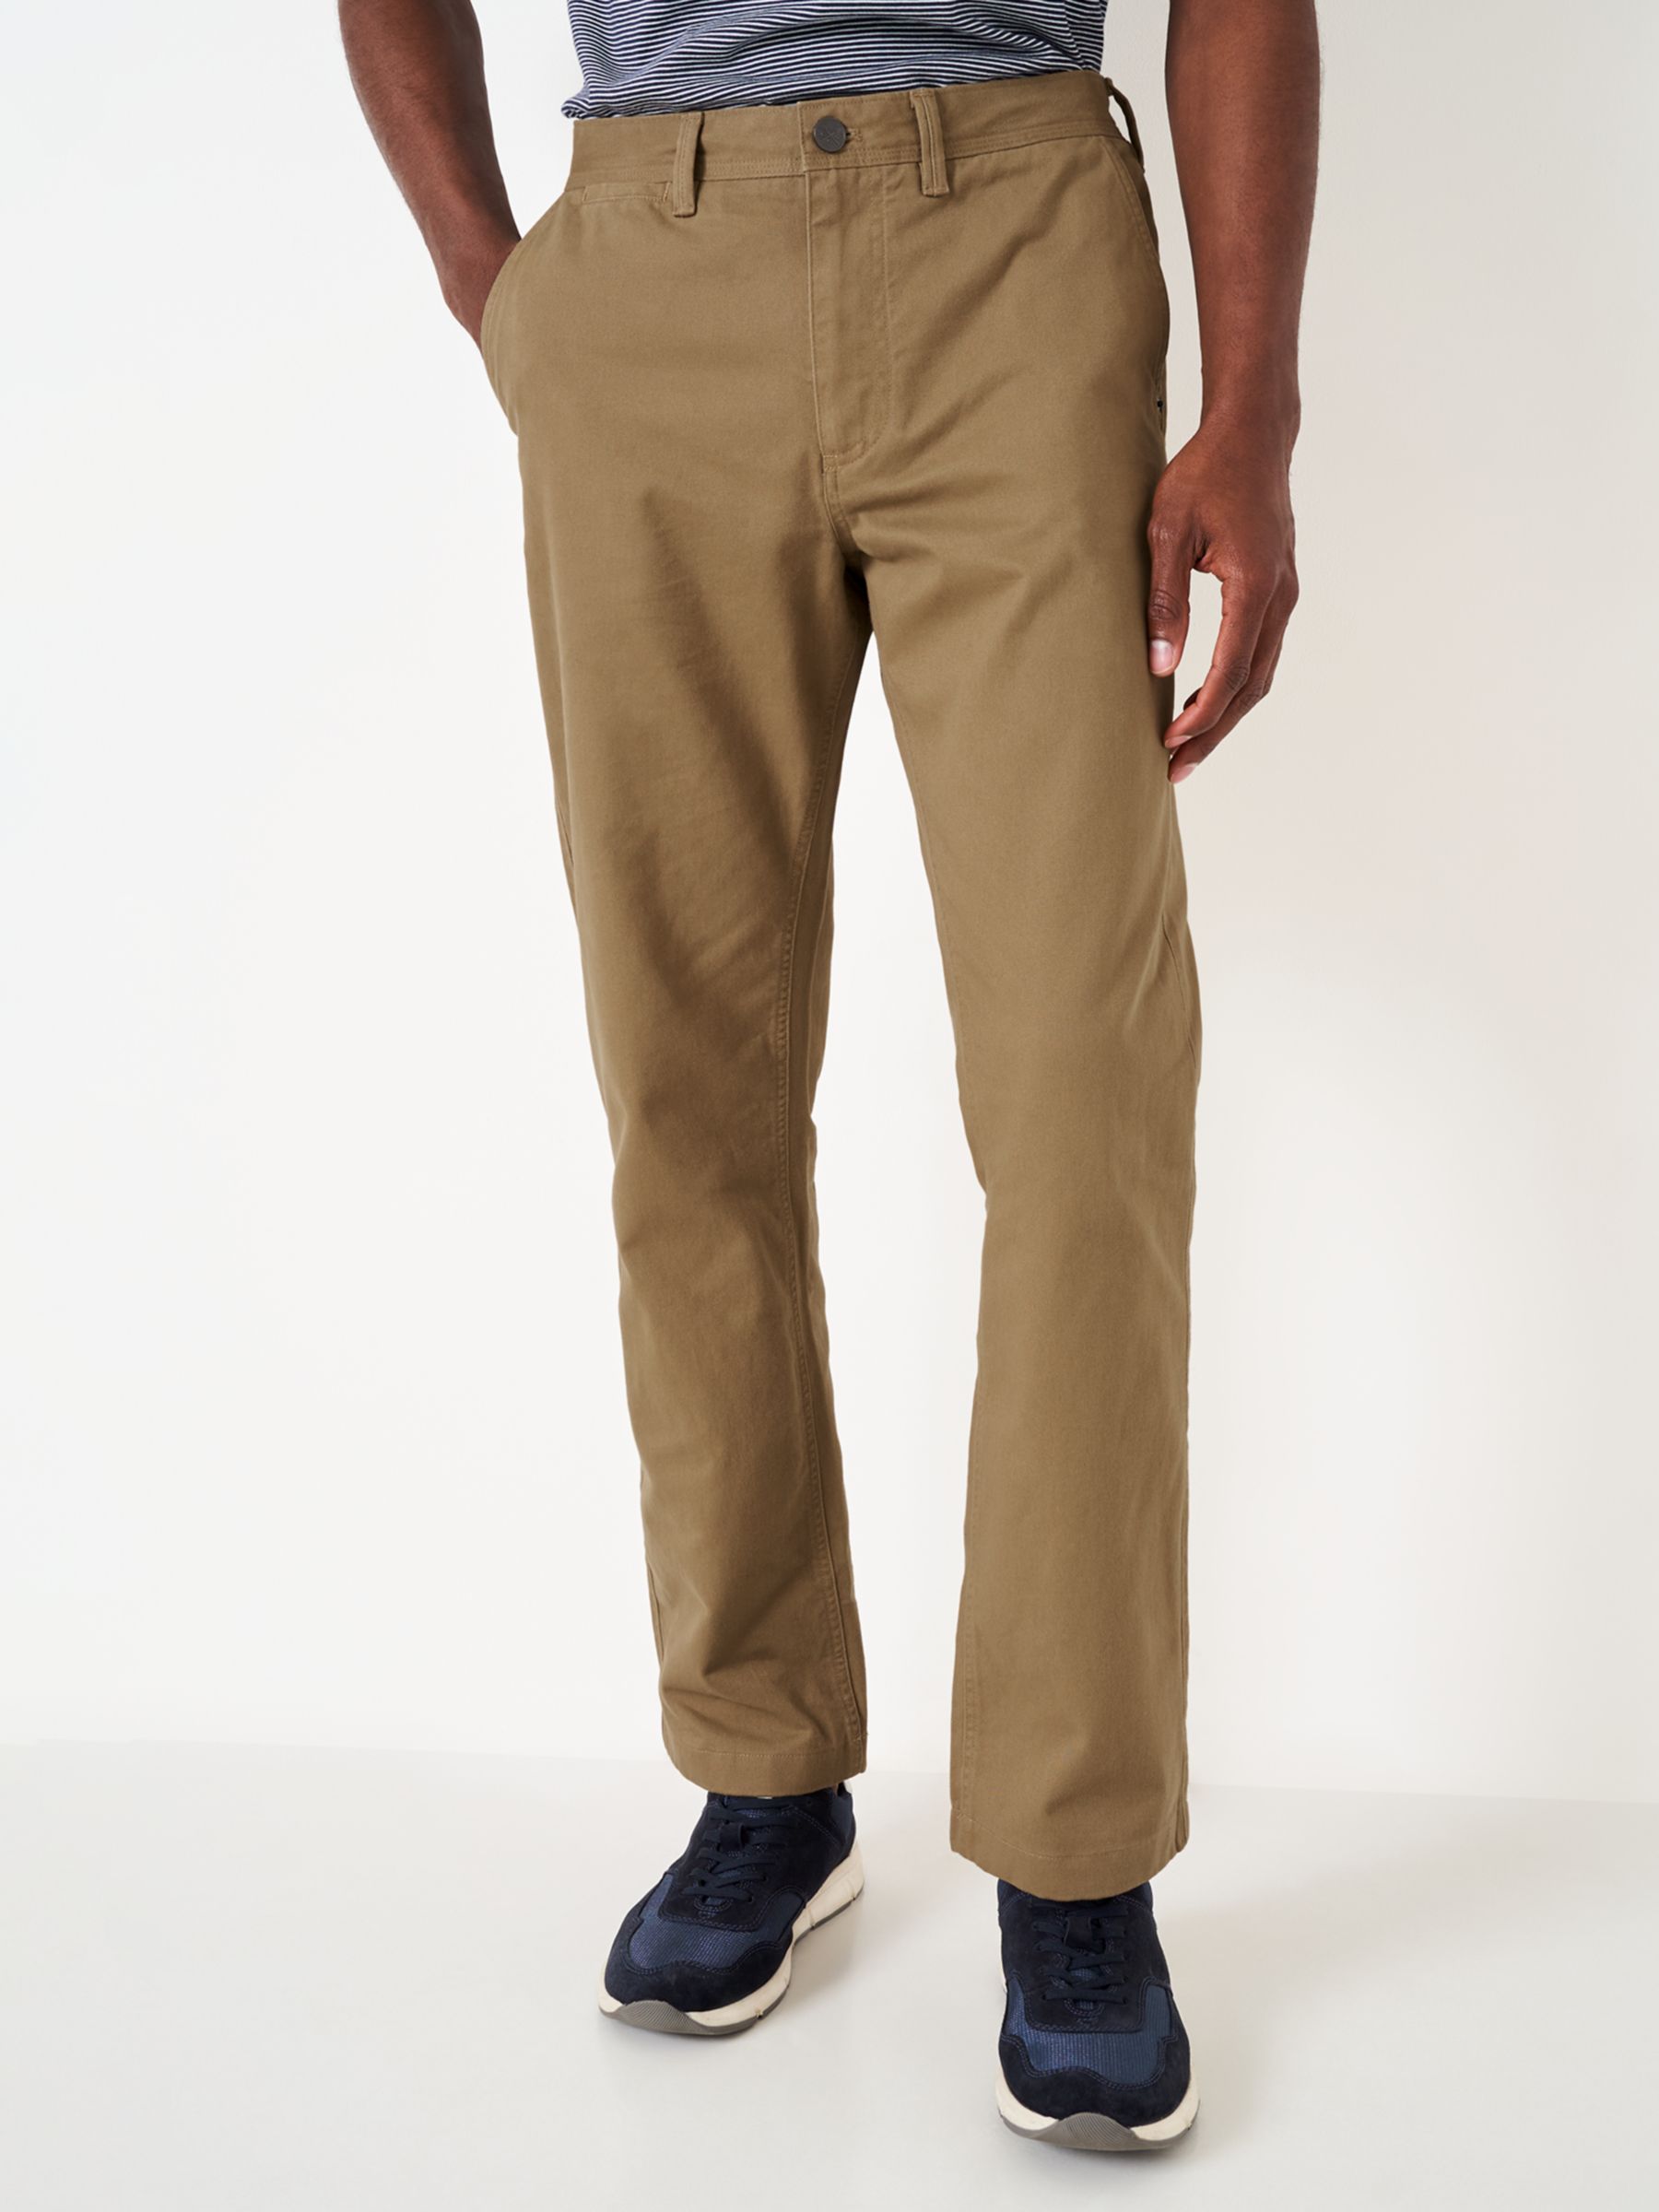 Crew Clothing Cotton Vint Chinos, Taupe, 34L